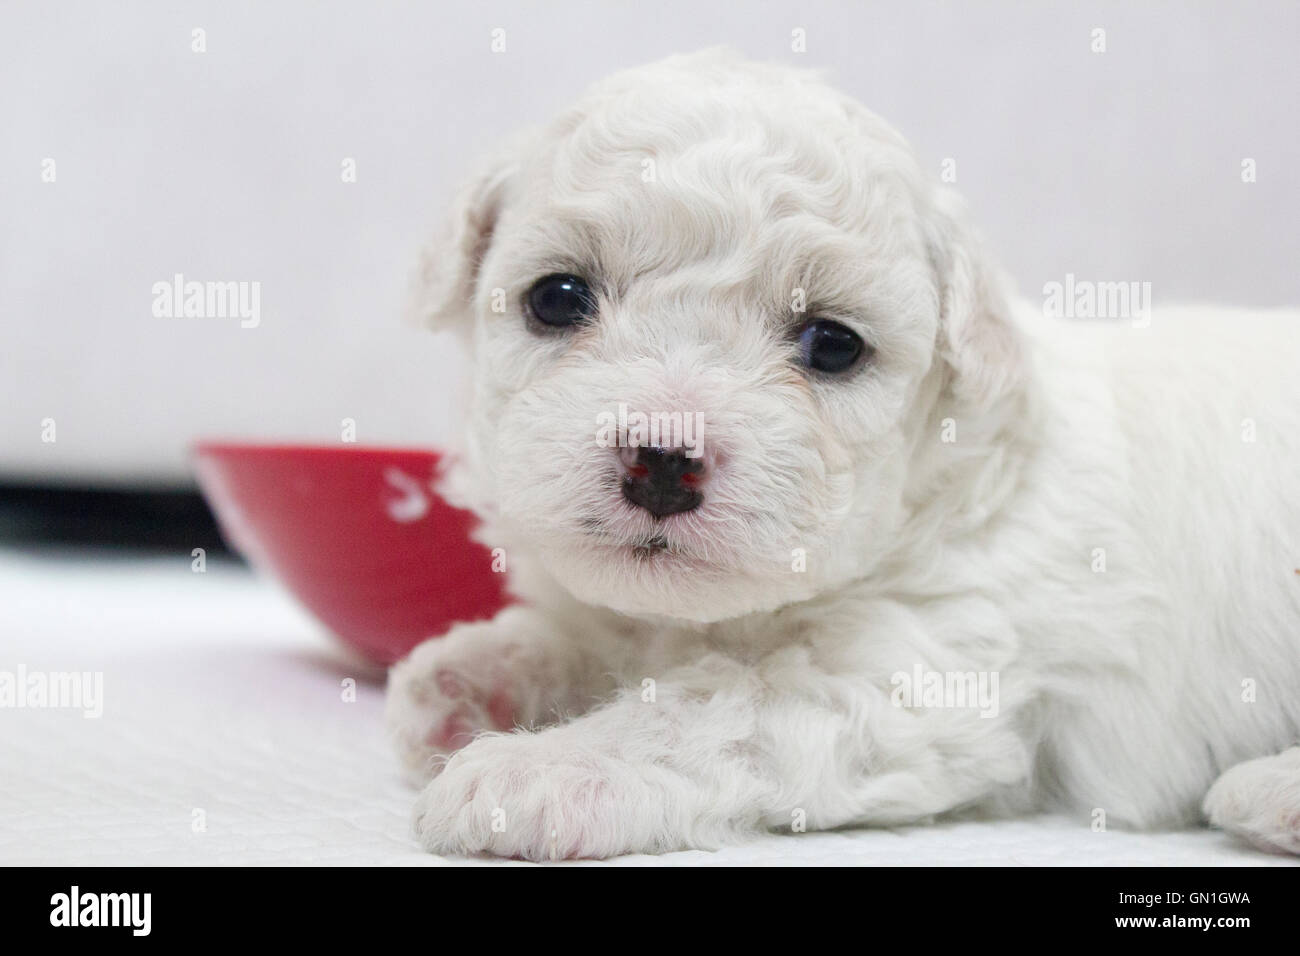 white bichon frise puppy with red bowl, white background Stock Photo